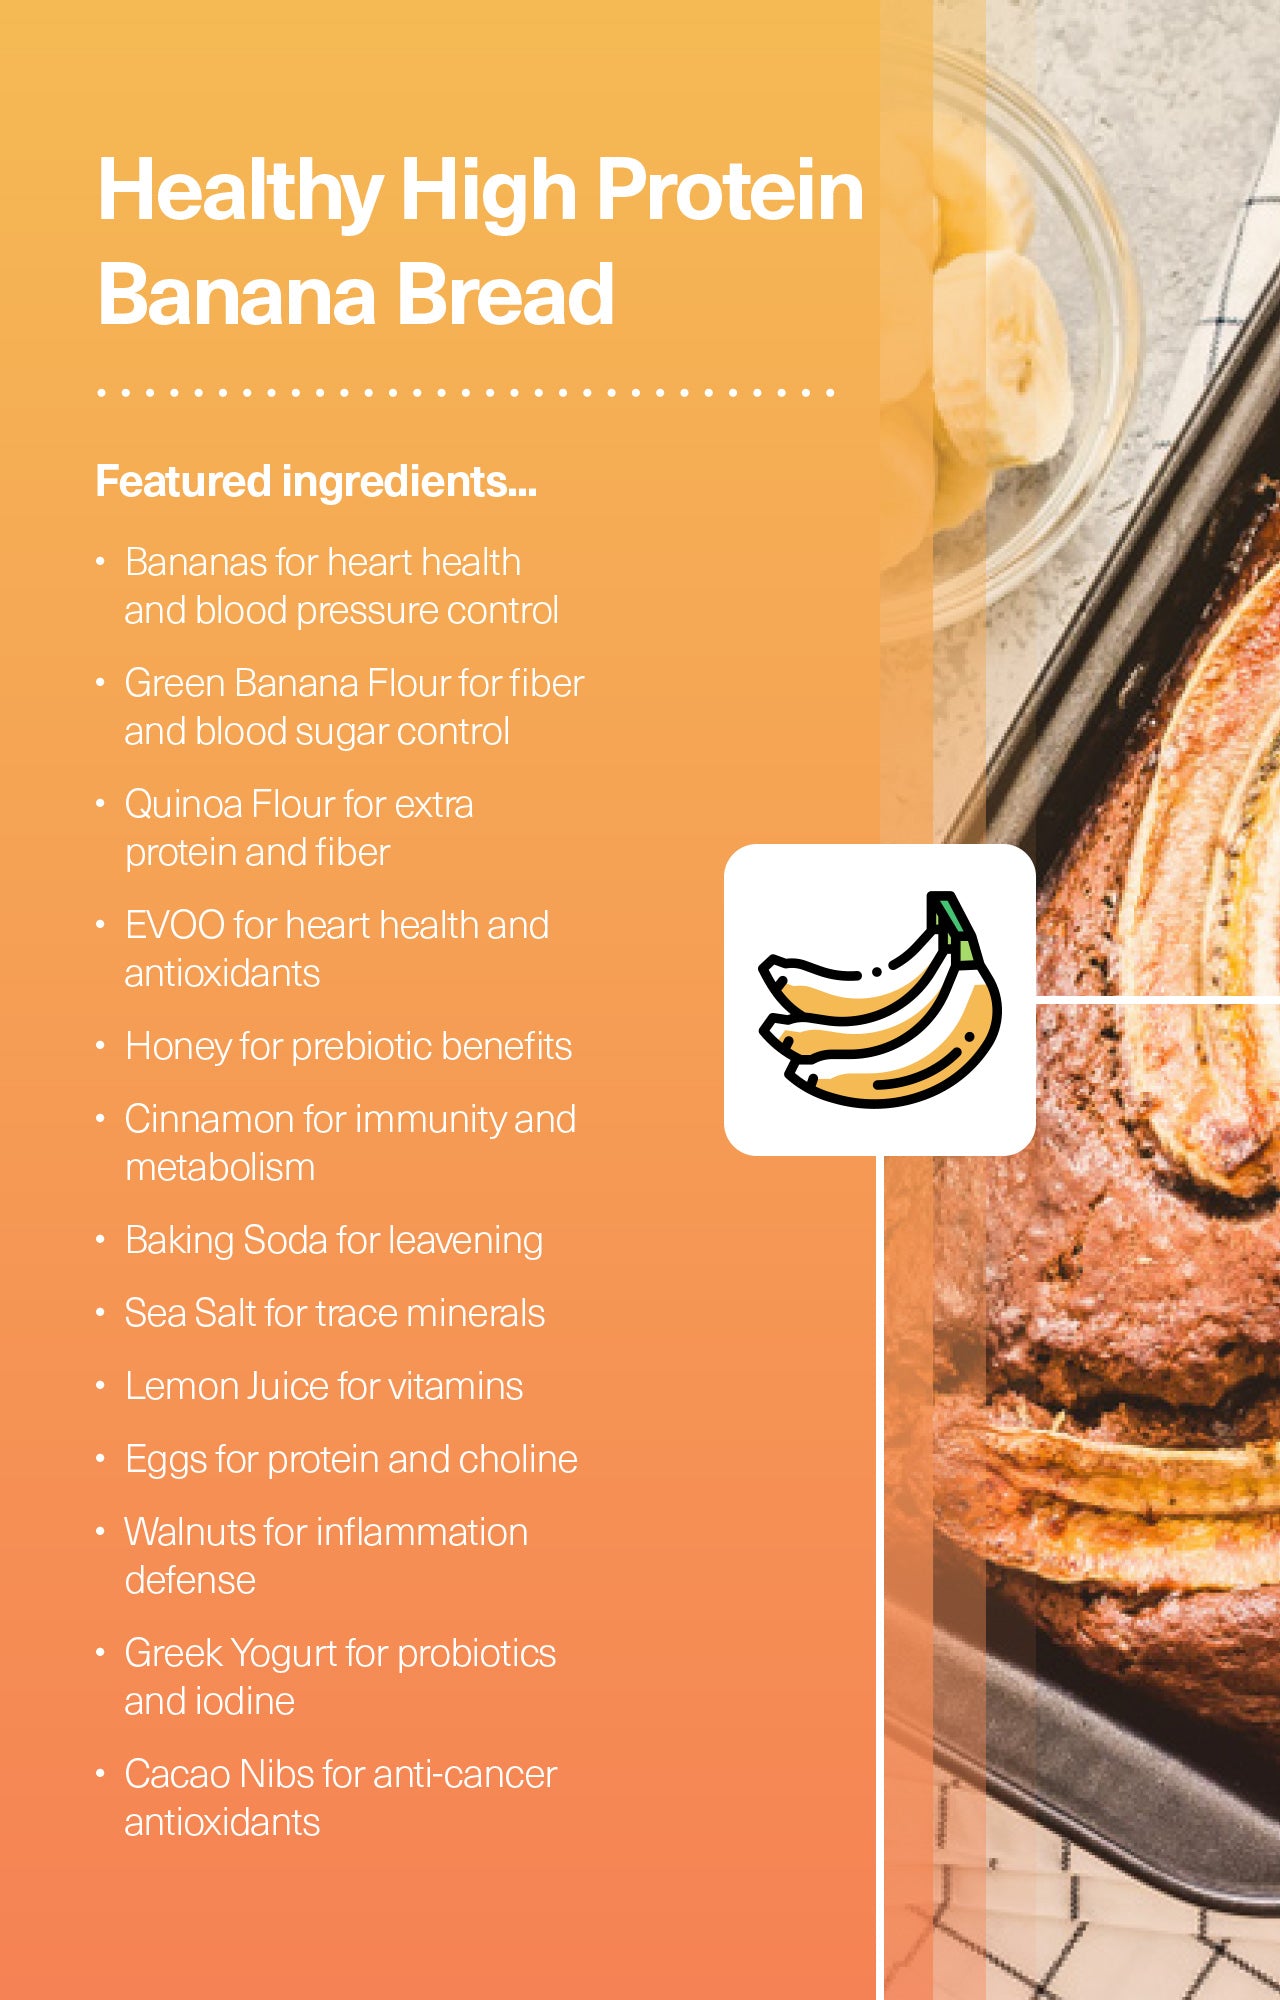 Healthy High Protein Banana Bread Ingredients